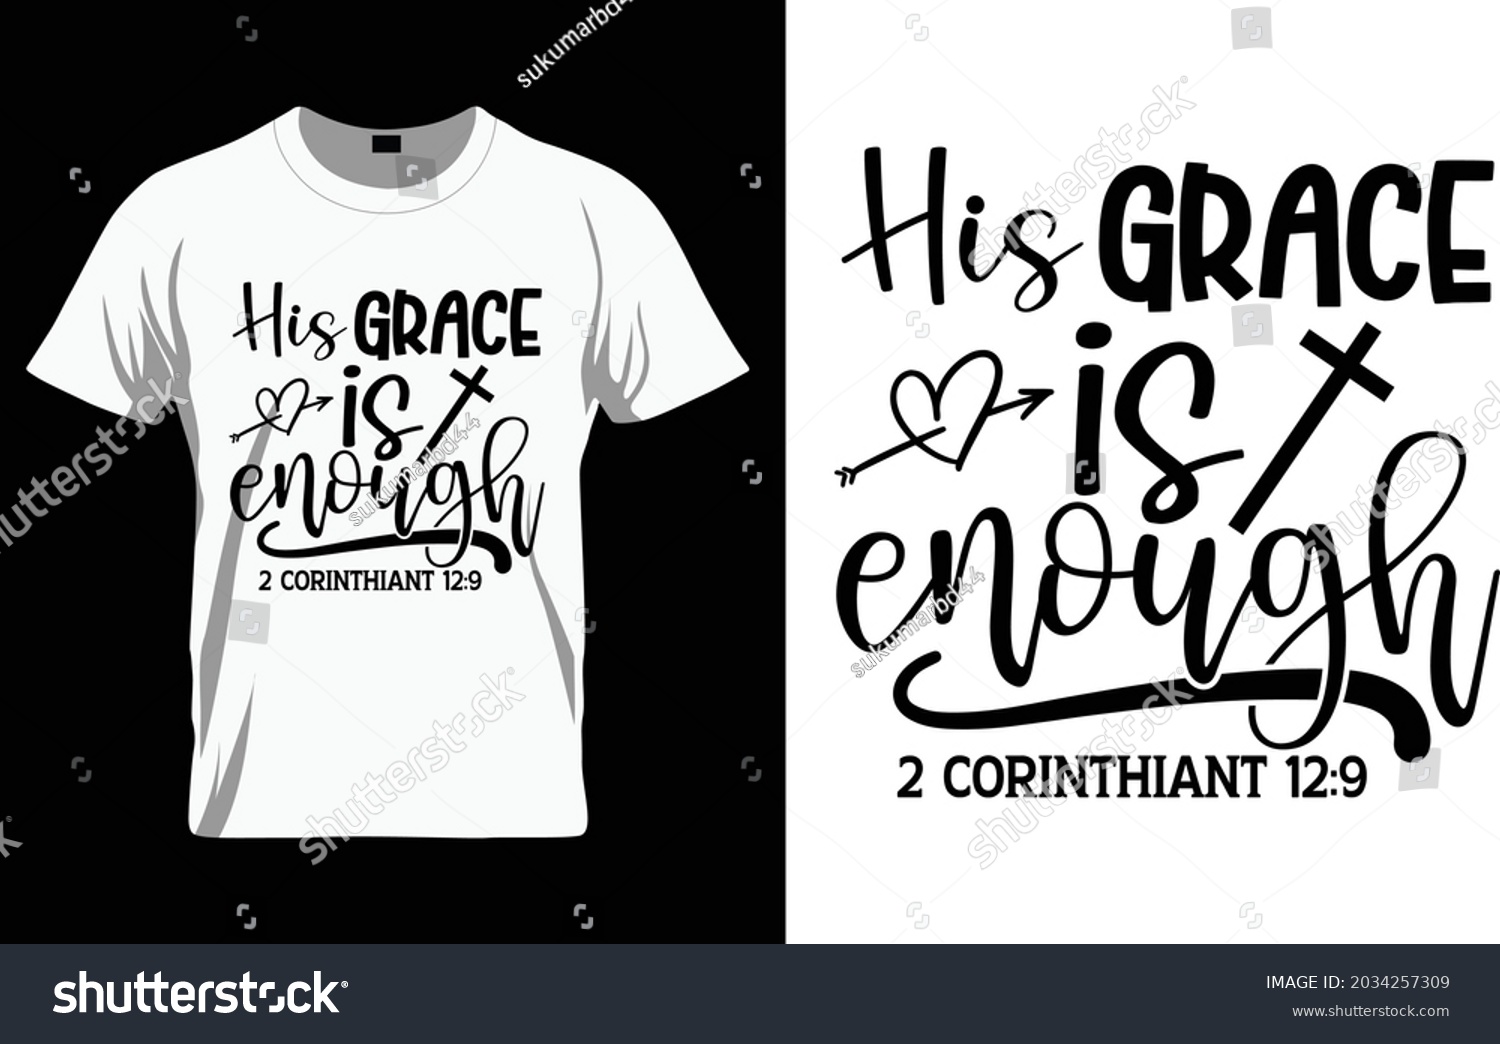 SVG of His grace is enough 2 corinthiant 12:9  - Bible Verse t shirts design, Hand drawn lettering phrase, Calligraphy t shirt design, Isolated on white background, svg Files for Cutting Cricut and Silhouett svg